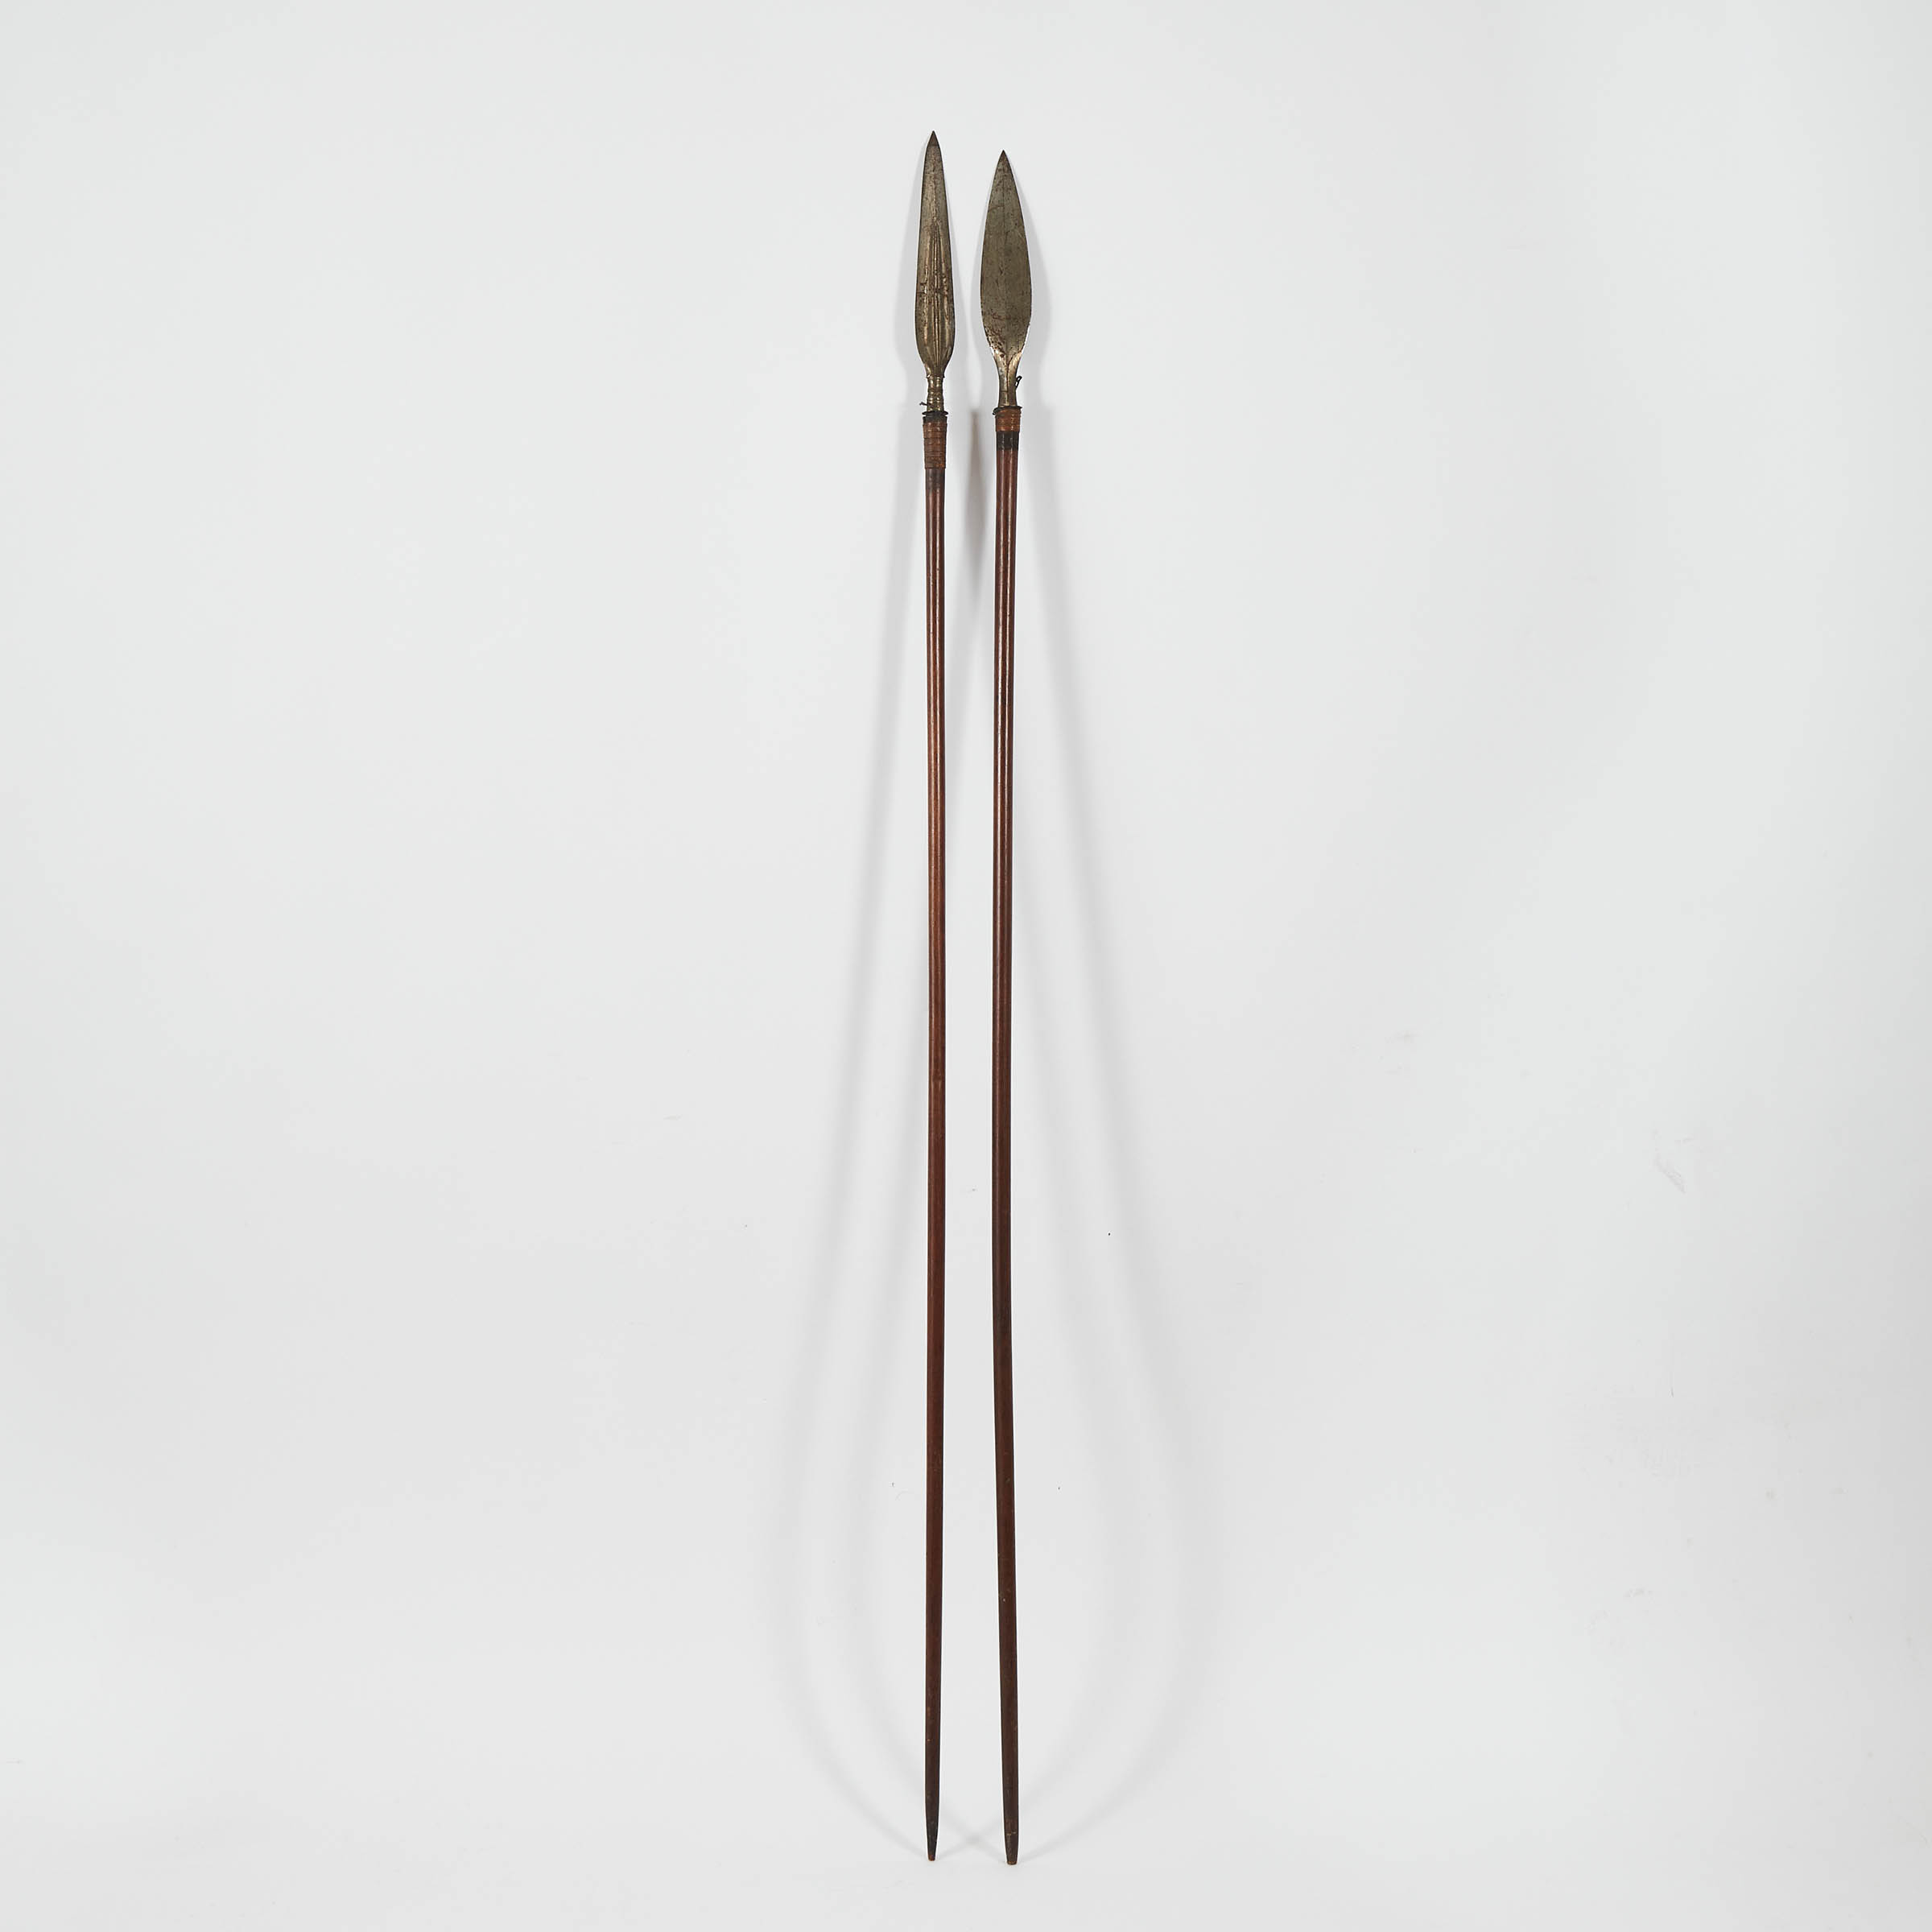 Two Moro Spears, Philippines, 19th/20thcentury